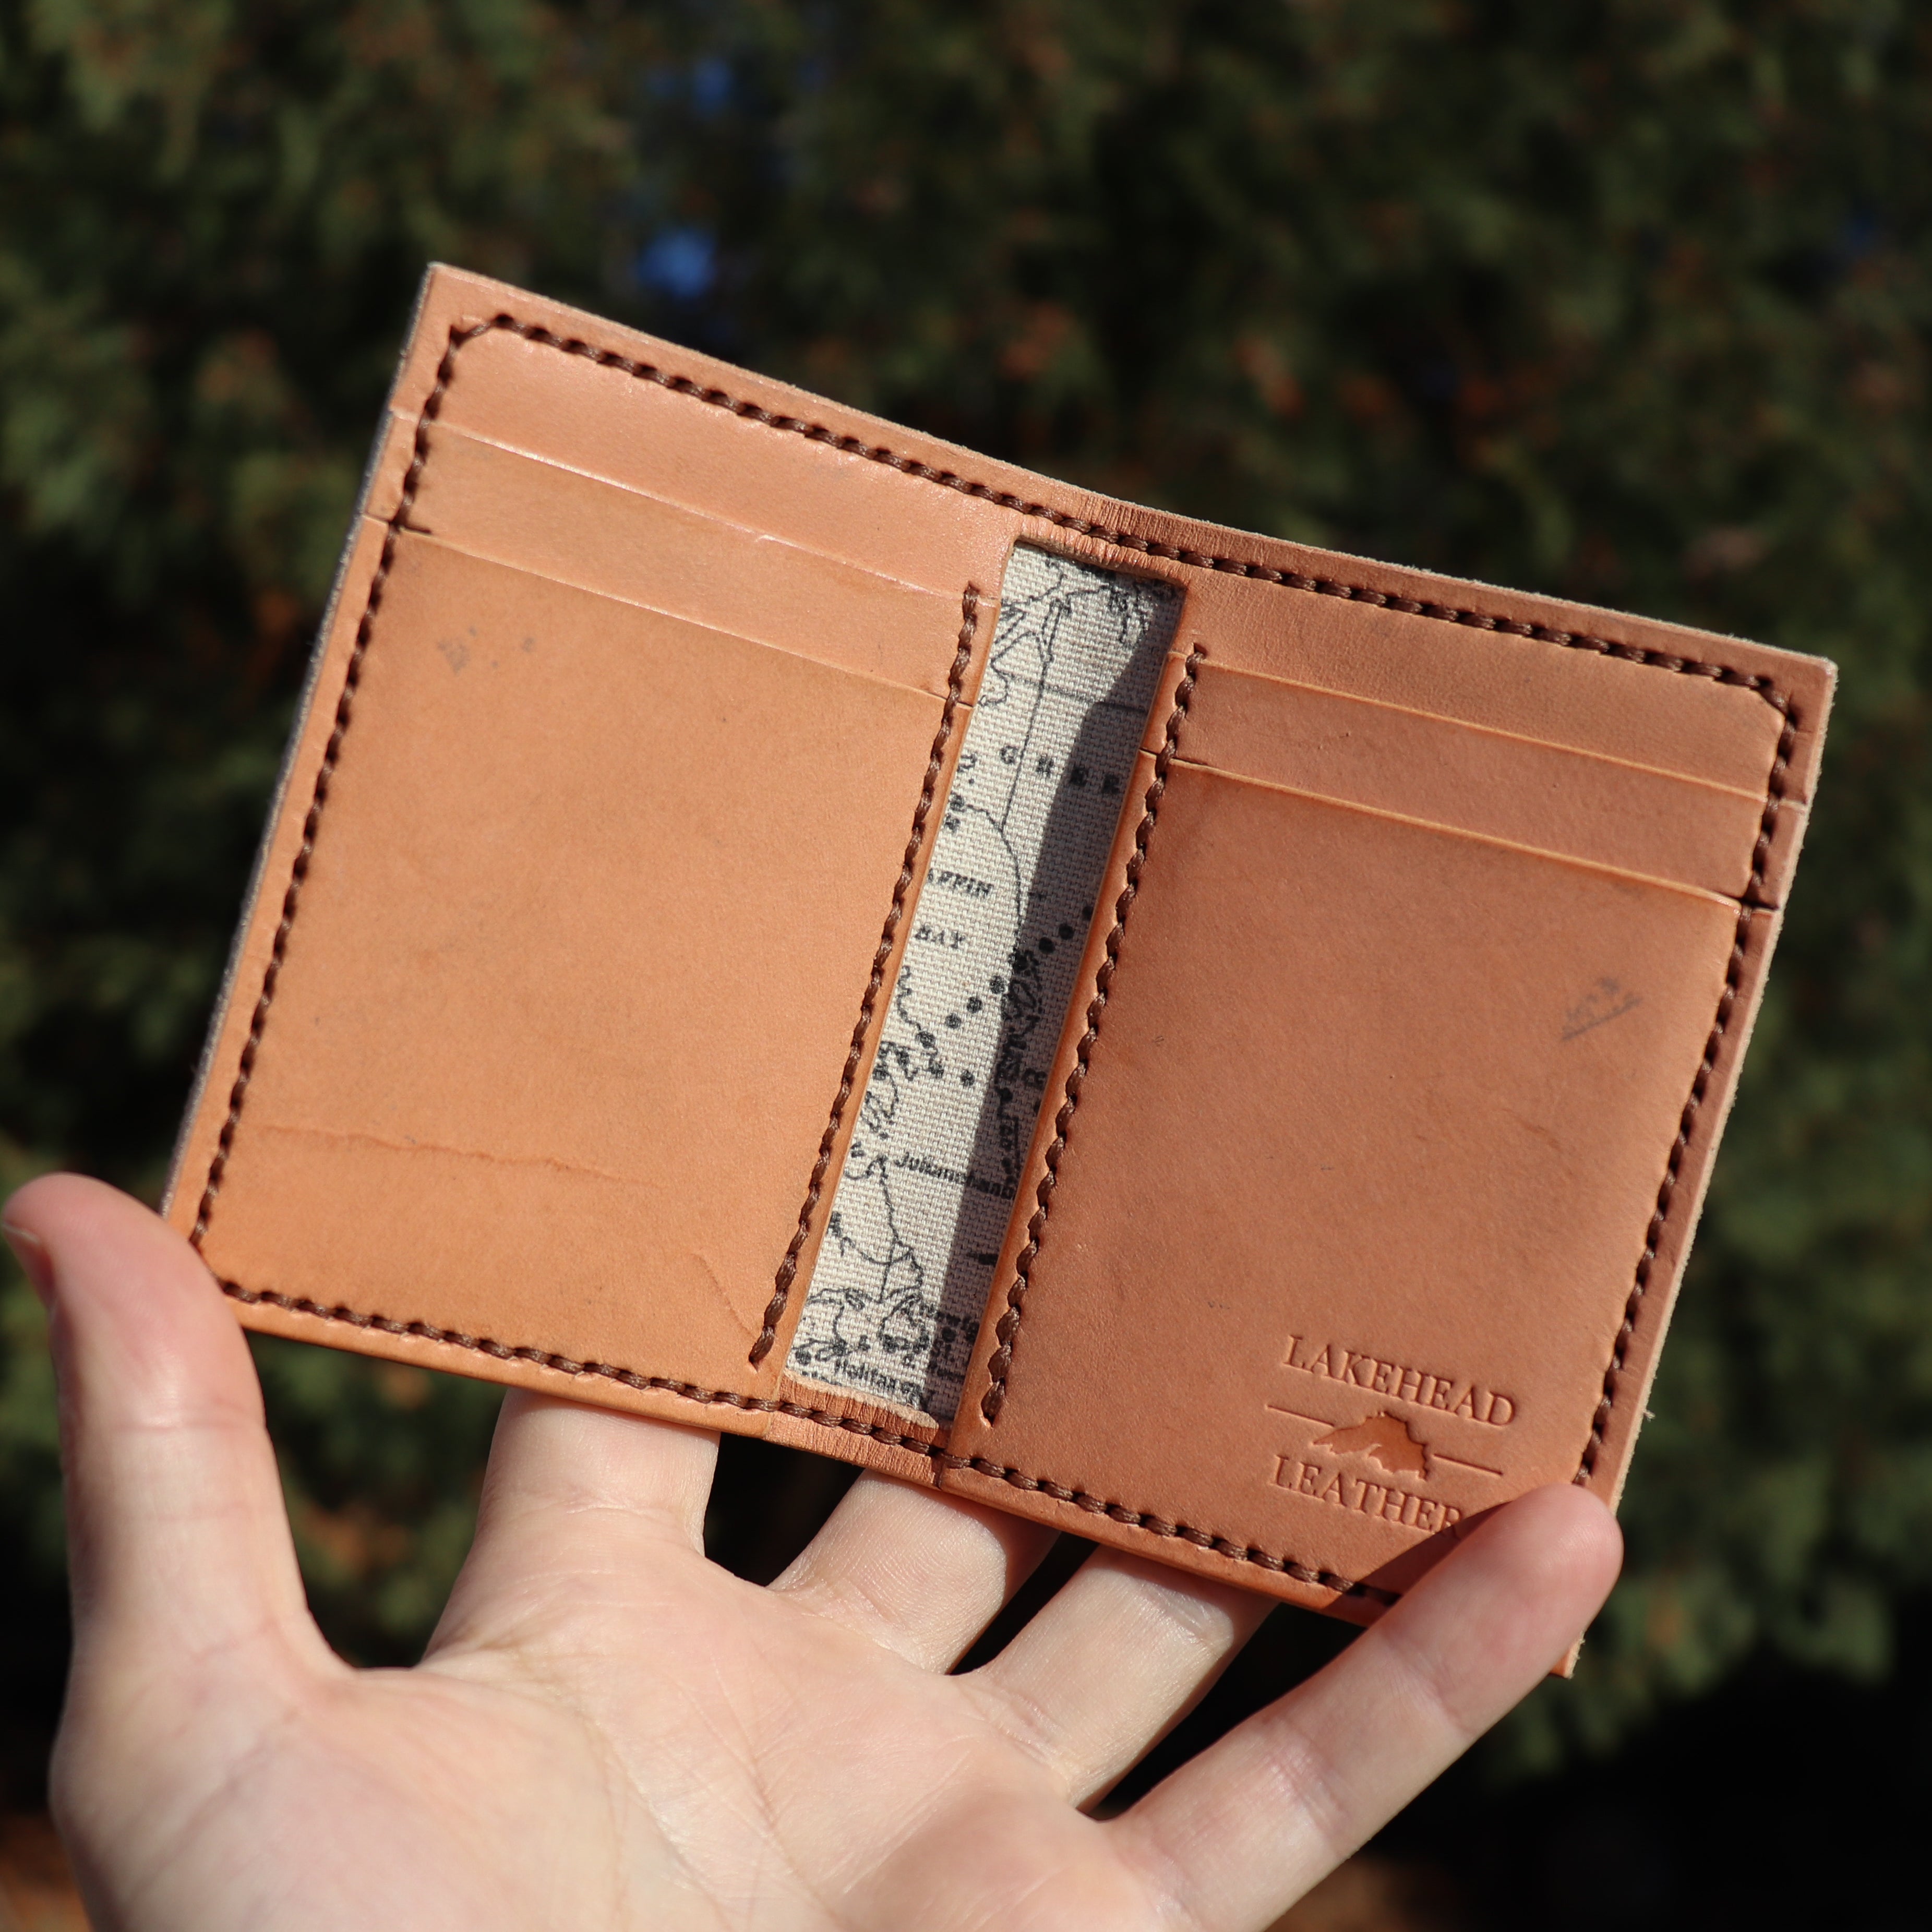 Made to Order Emerald Green and Natural Vegetable Tanned Italian Leather Minimalist Card Wallet Front Pocket Holder Brown Thread Hand Made 4 Pocket /